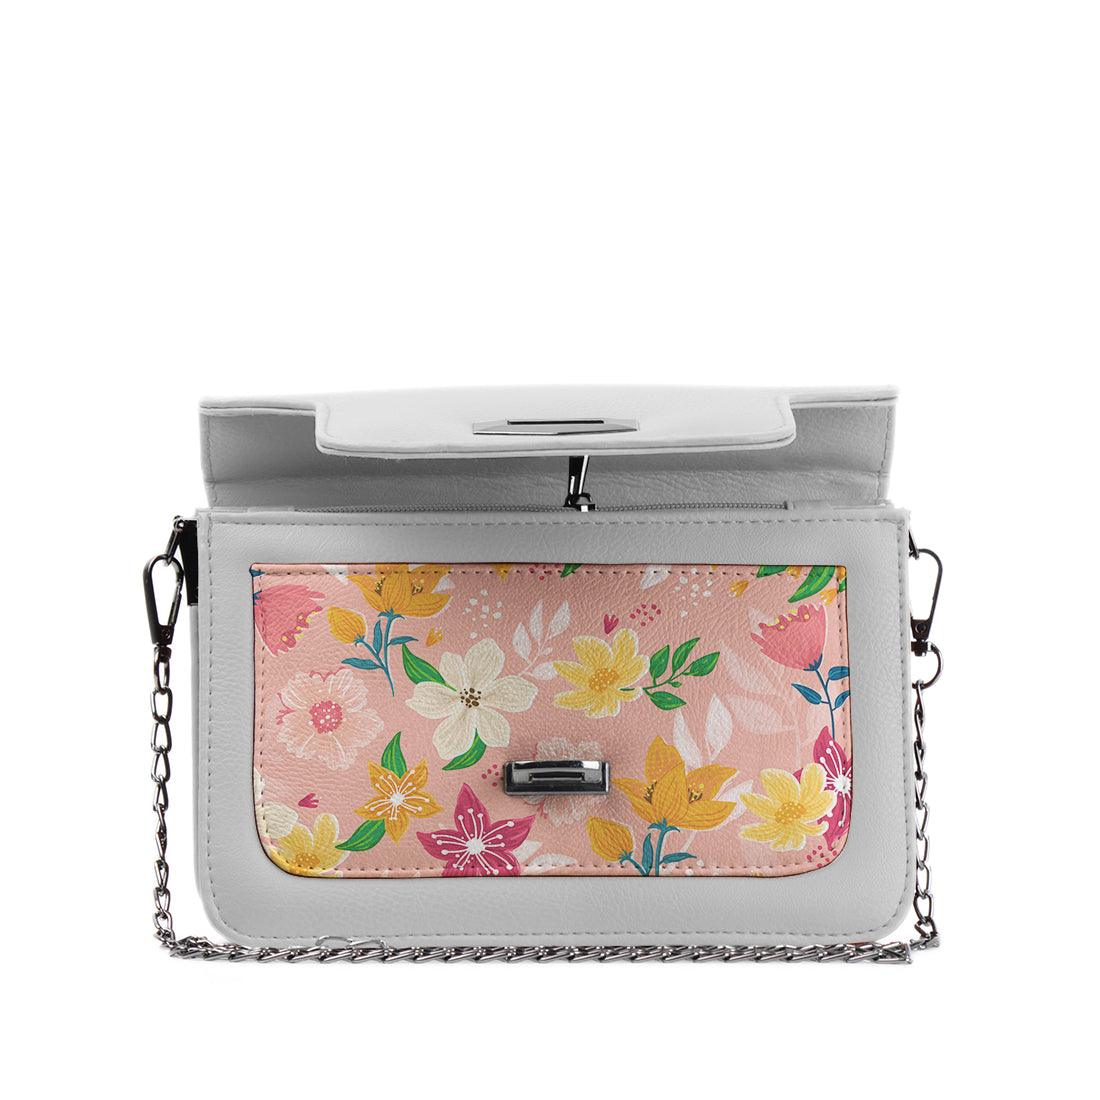 White Mini Embossed Chain Bag Rose Floral